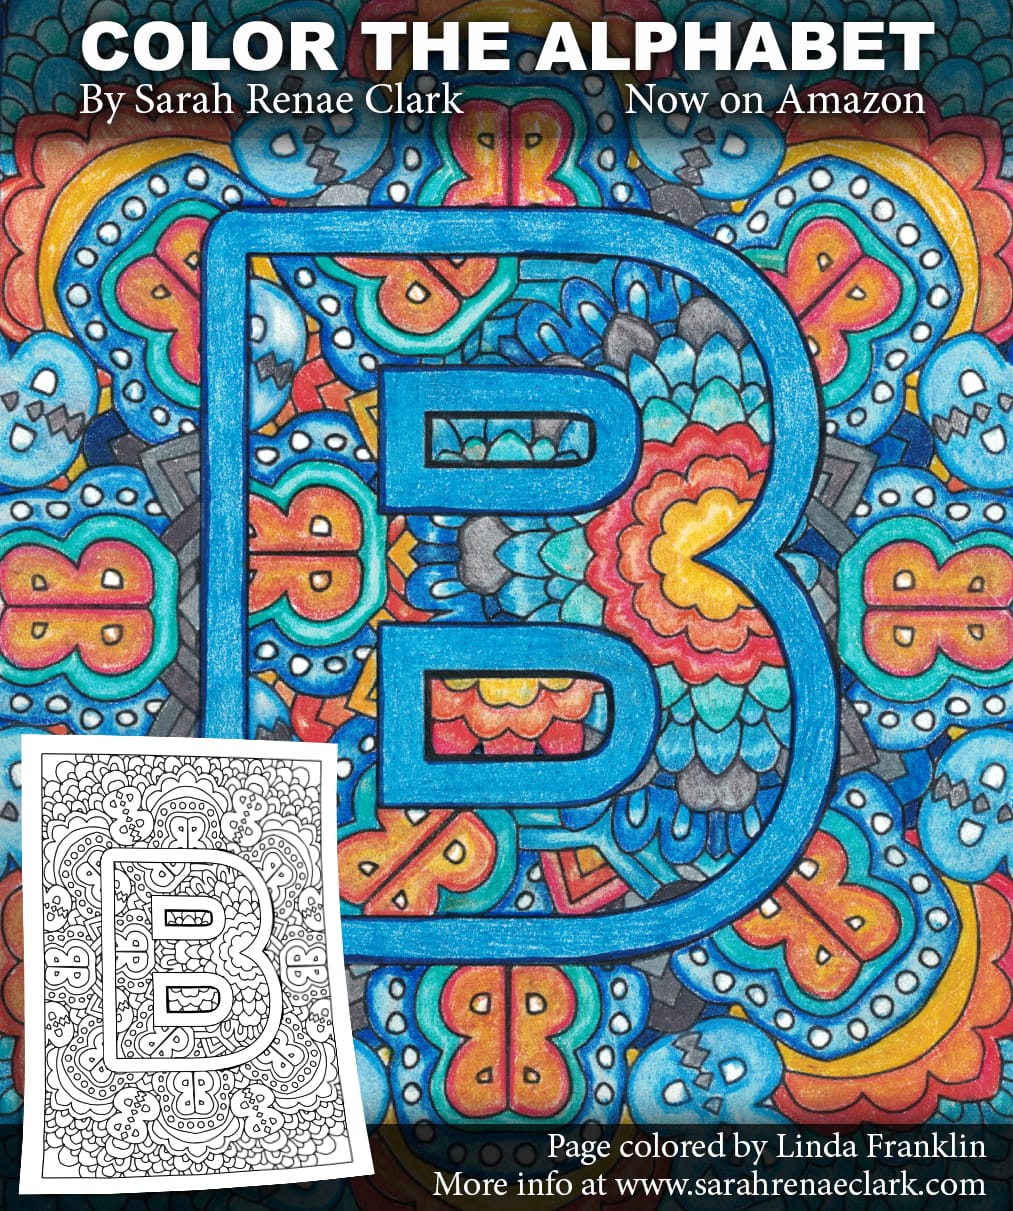 Download Color the Alphabet: Printable Adult Coloring Book - Sarah Renae Clark - Coloring Book Artist and ...